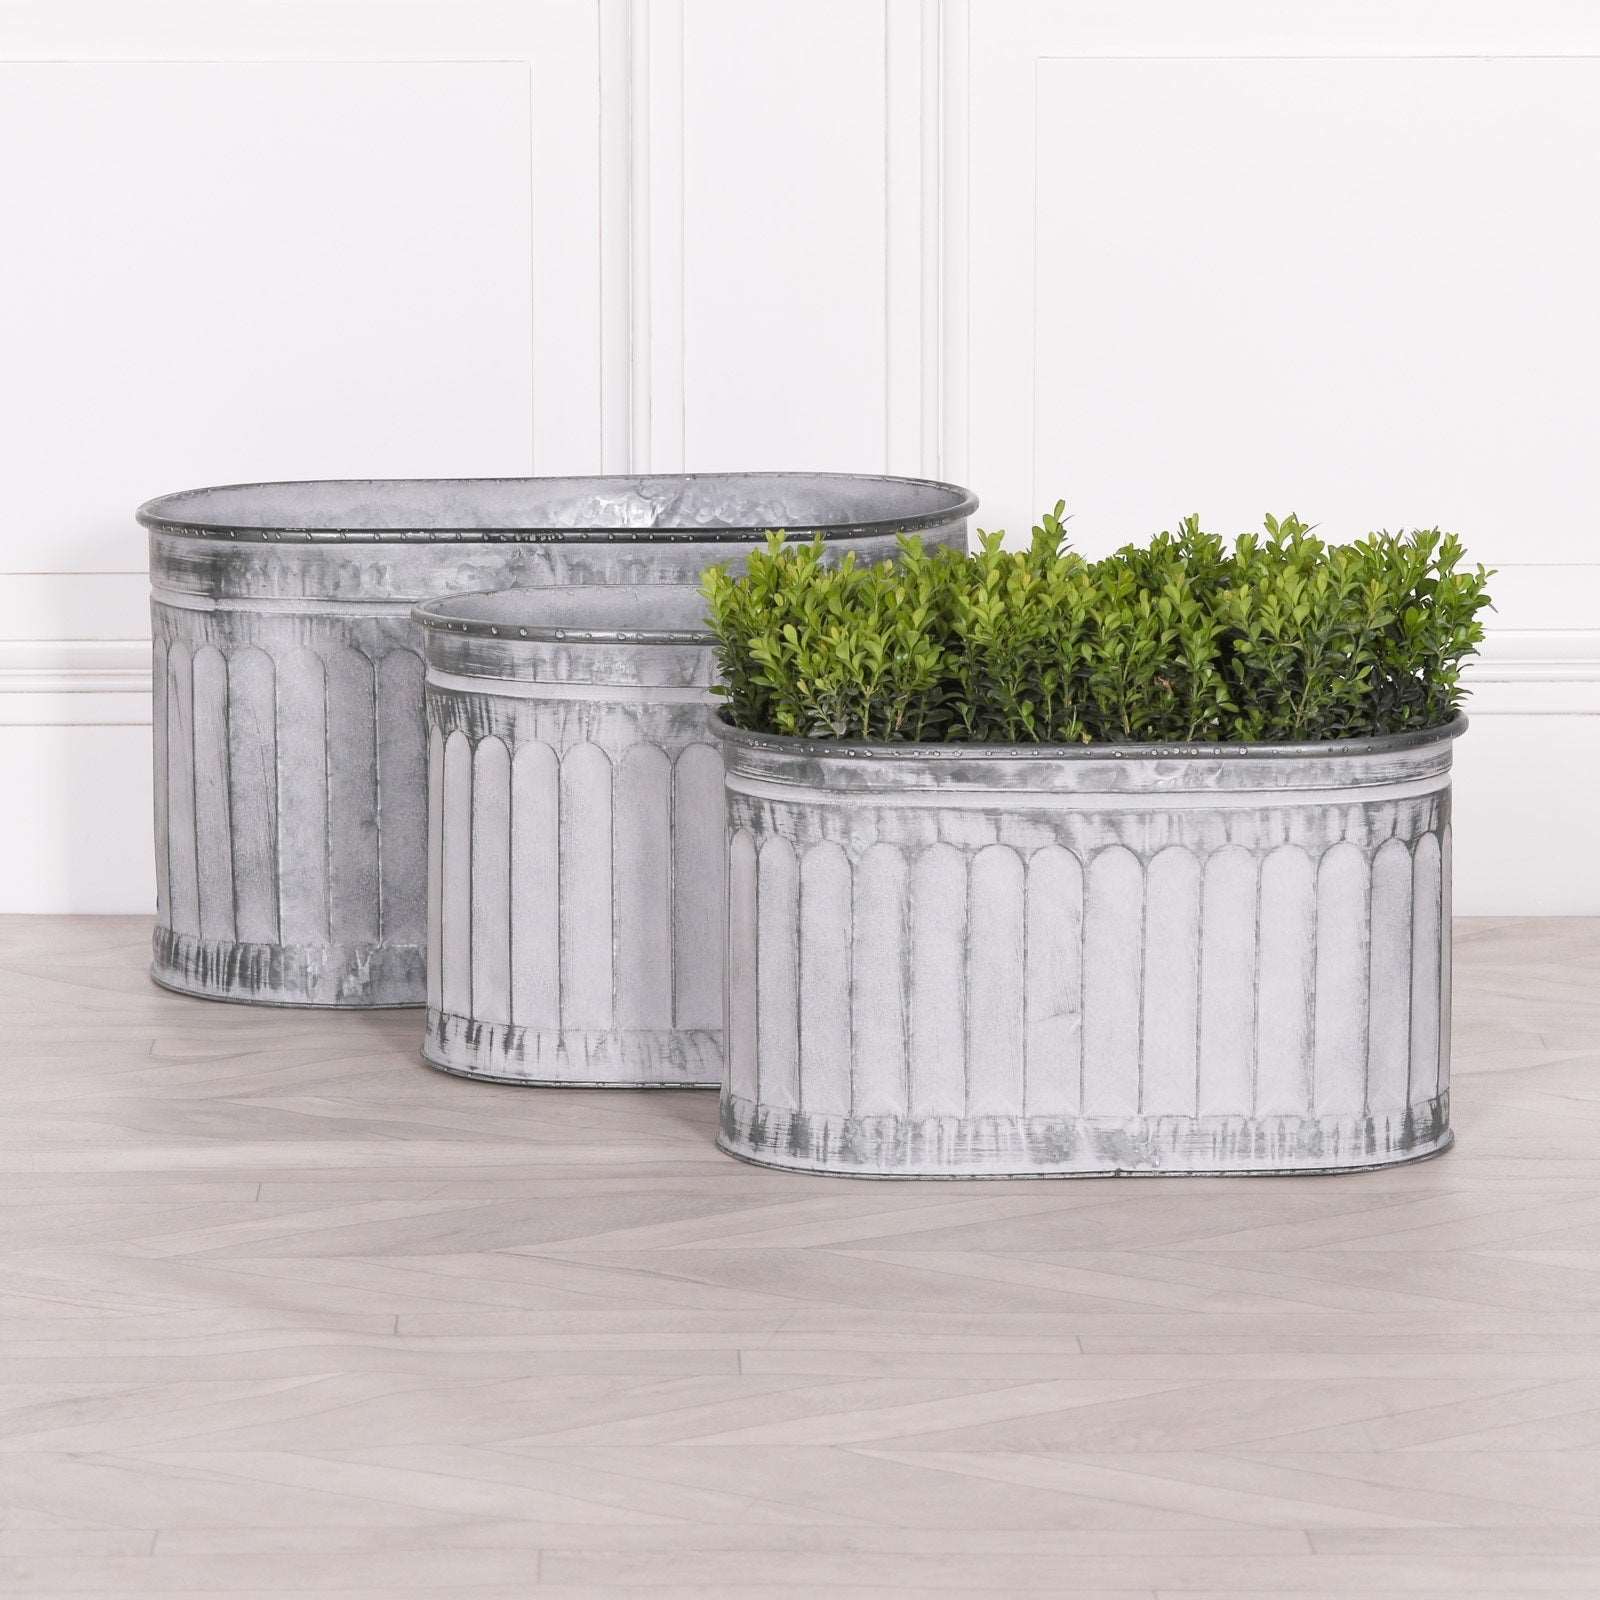 Arched Pattern Metal Planter - Large